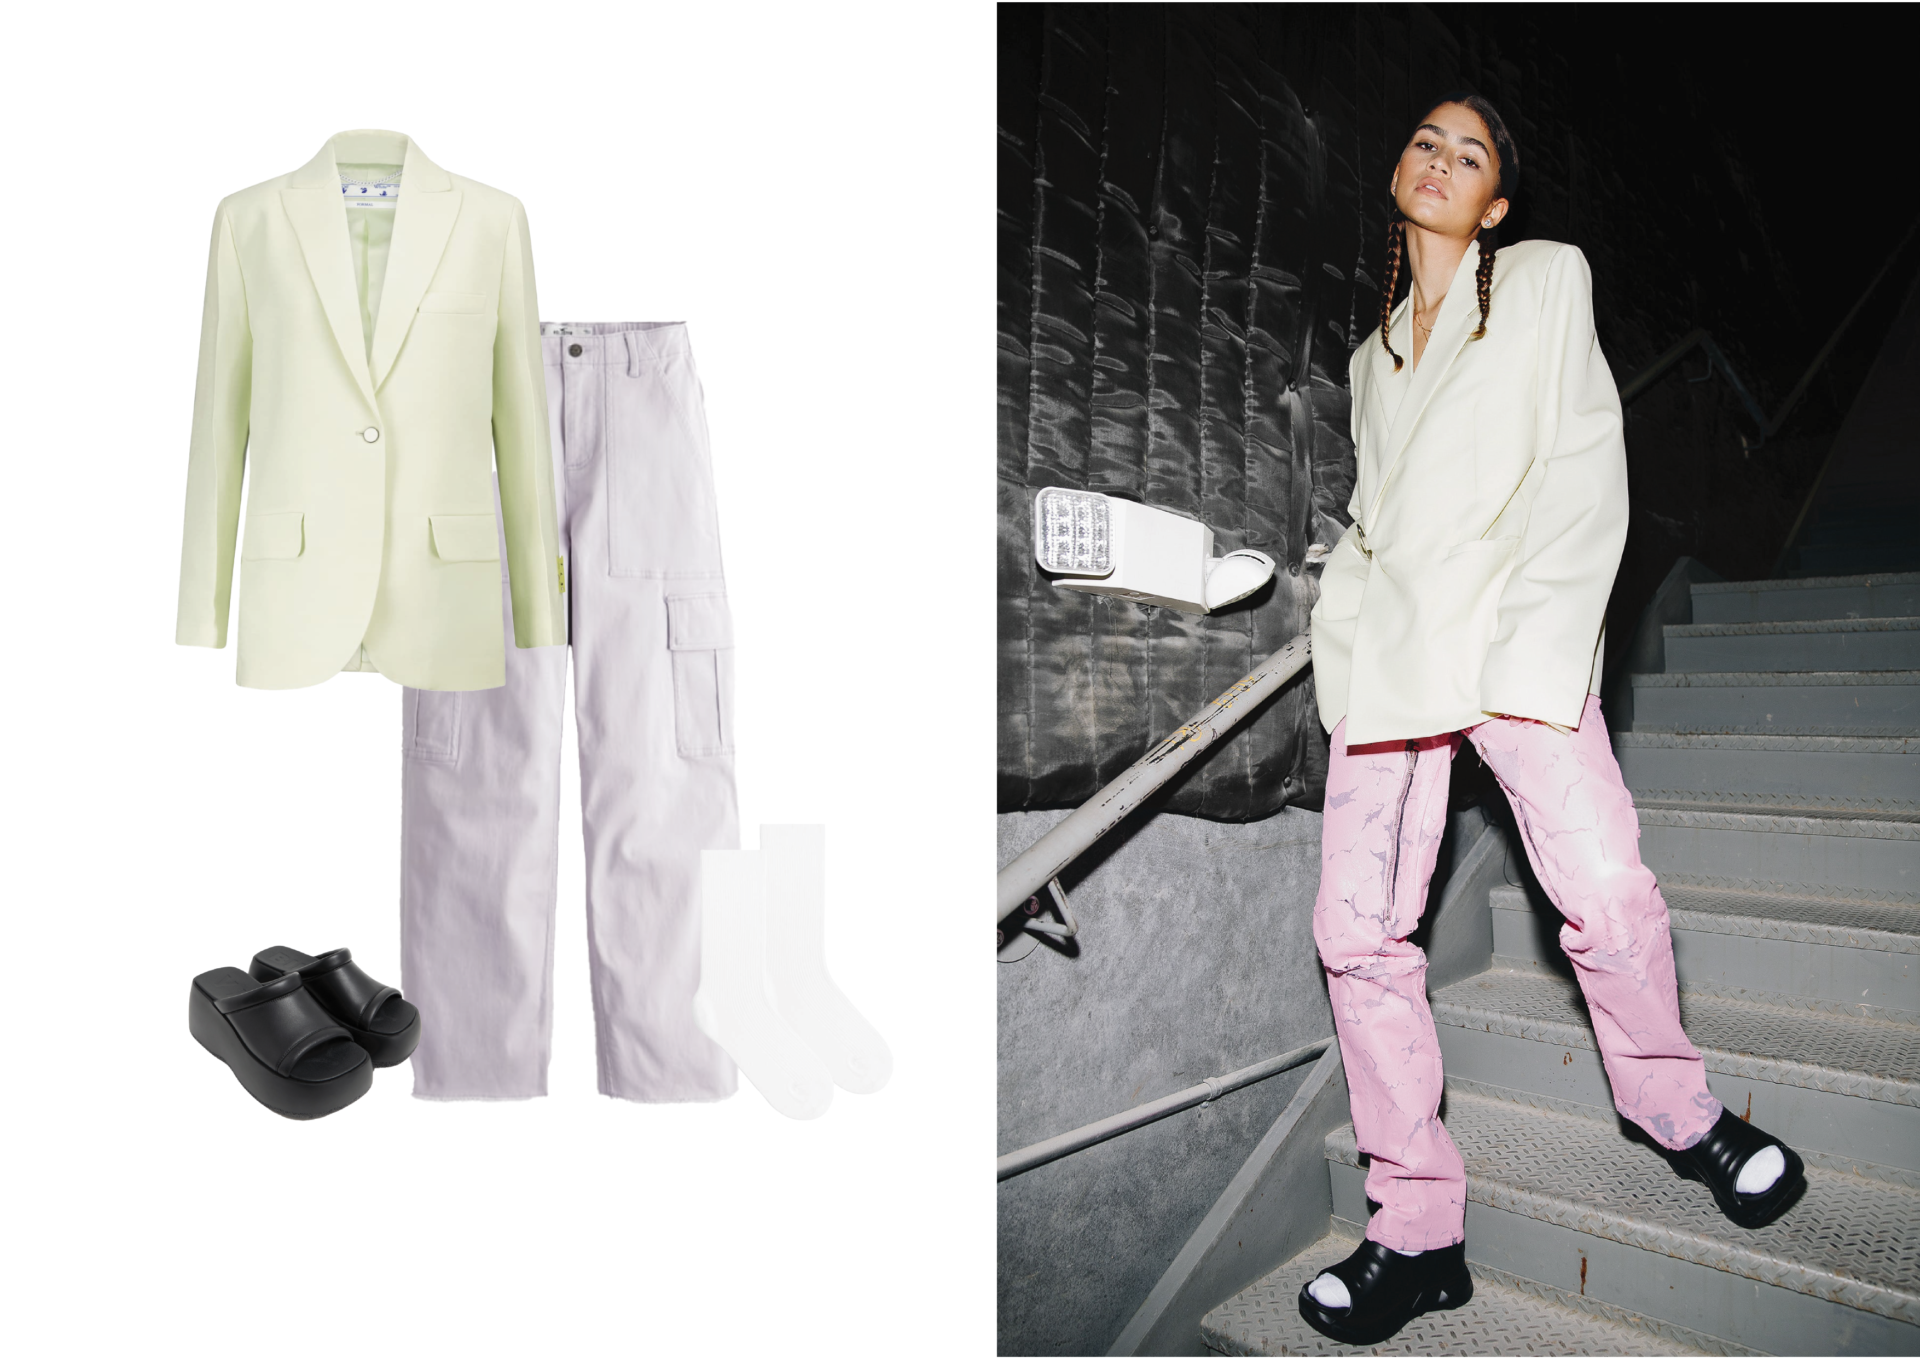 Zendaya's Top 7 Off-Duty Looks To Copy At Home - Voir Fashion